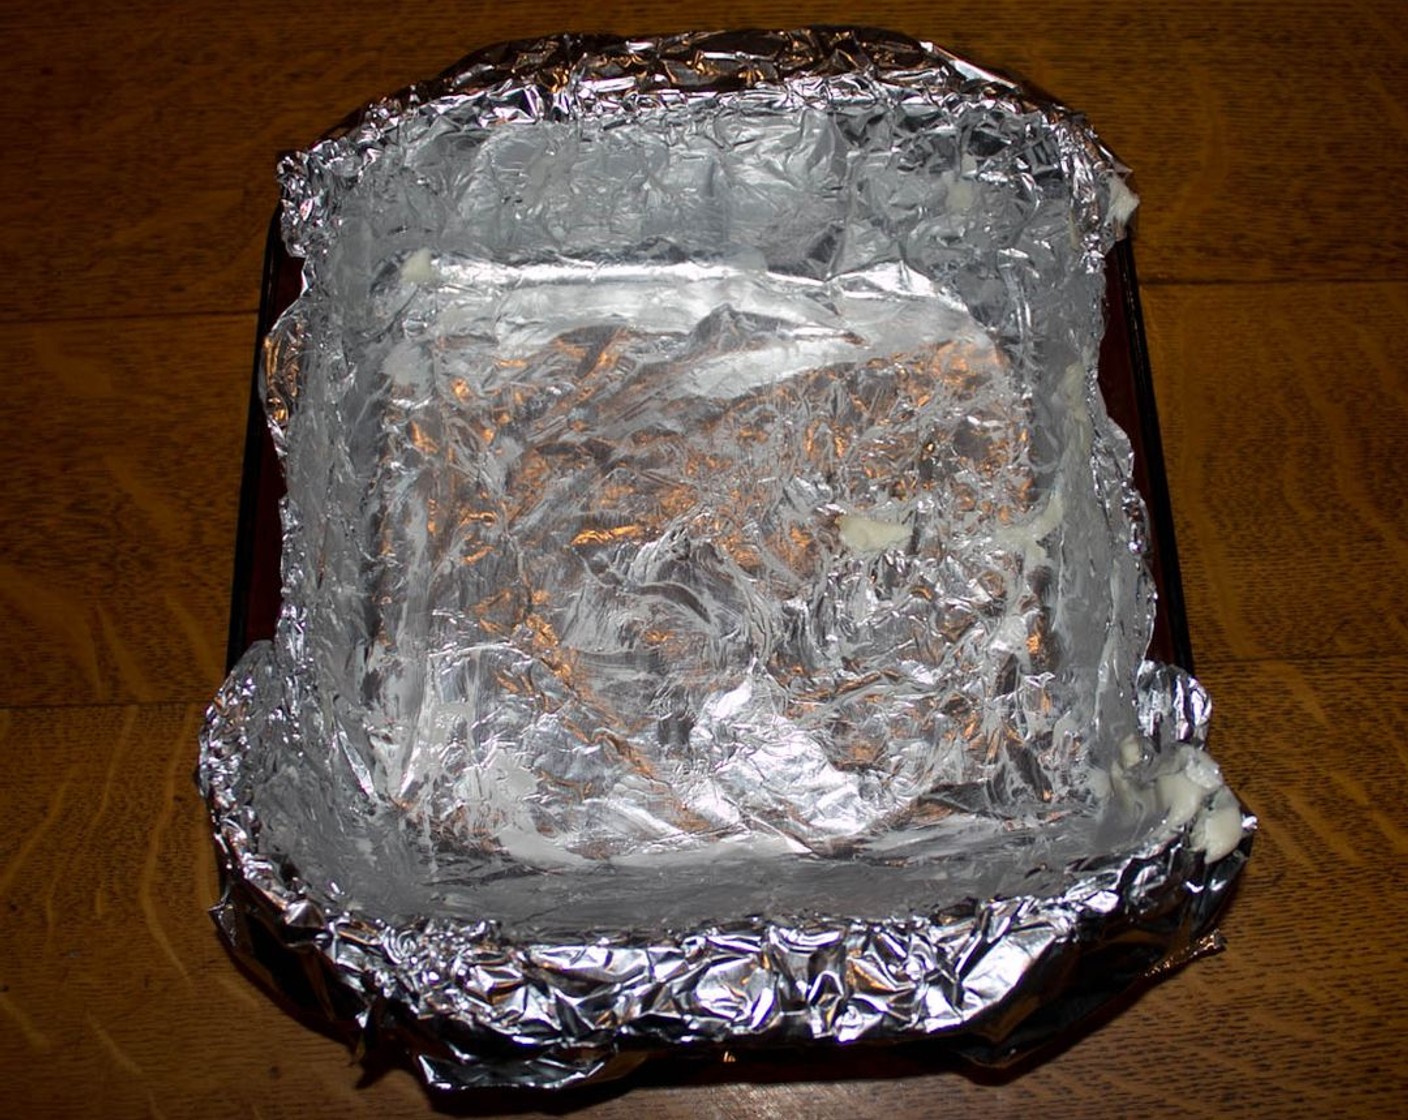 step 1 Preheat the oven to 350 degrees F (180 degrees C). Line an 8-inch square baking pan with aluminum foil and grease foil with either butter or vegetable shortening.